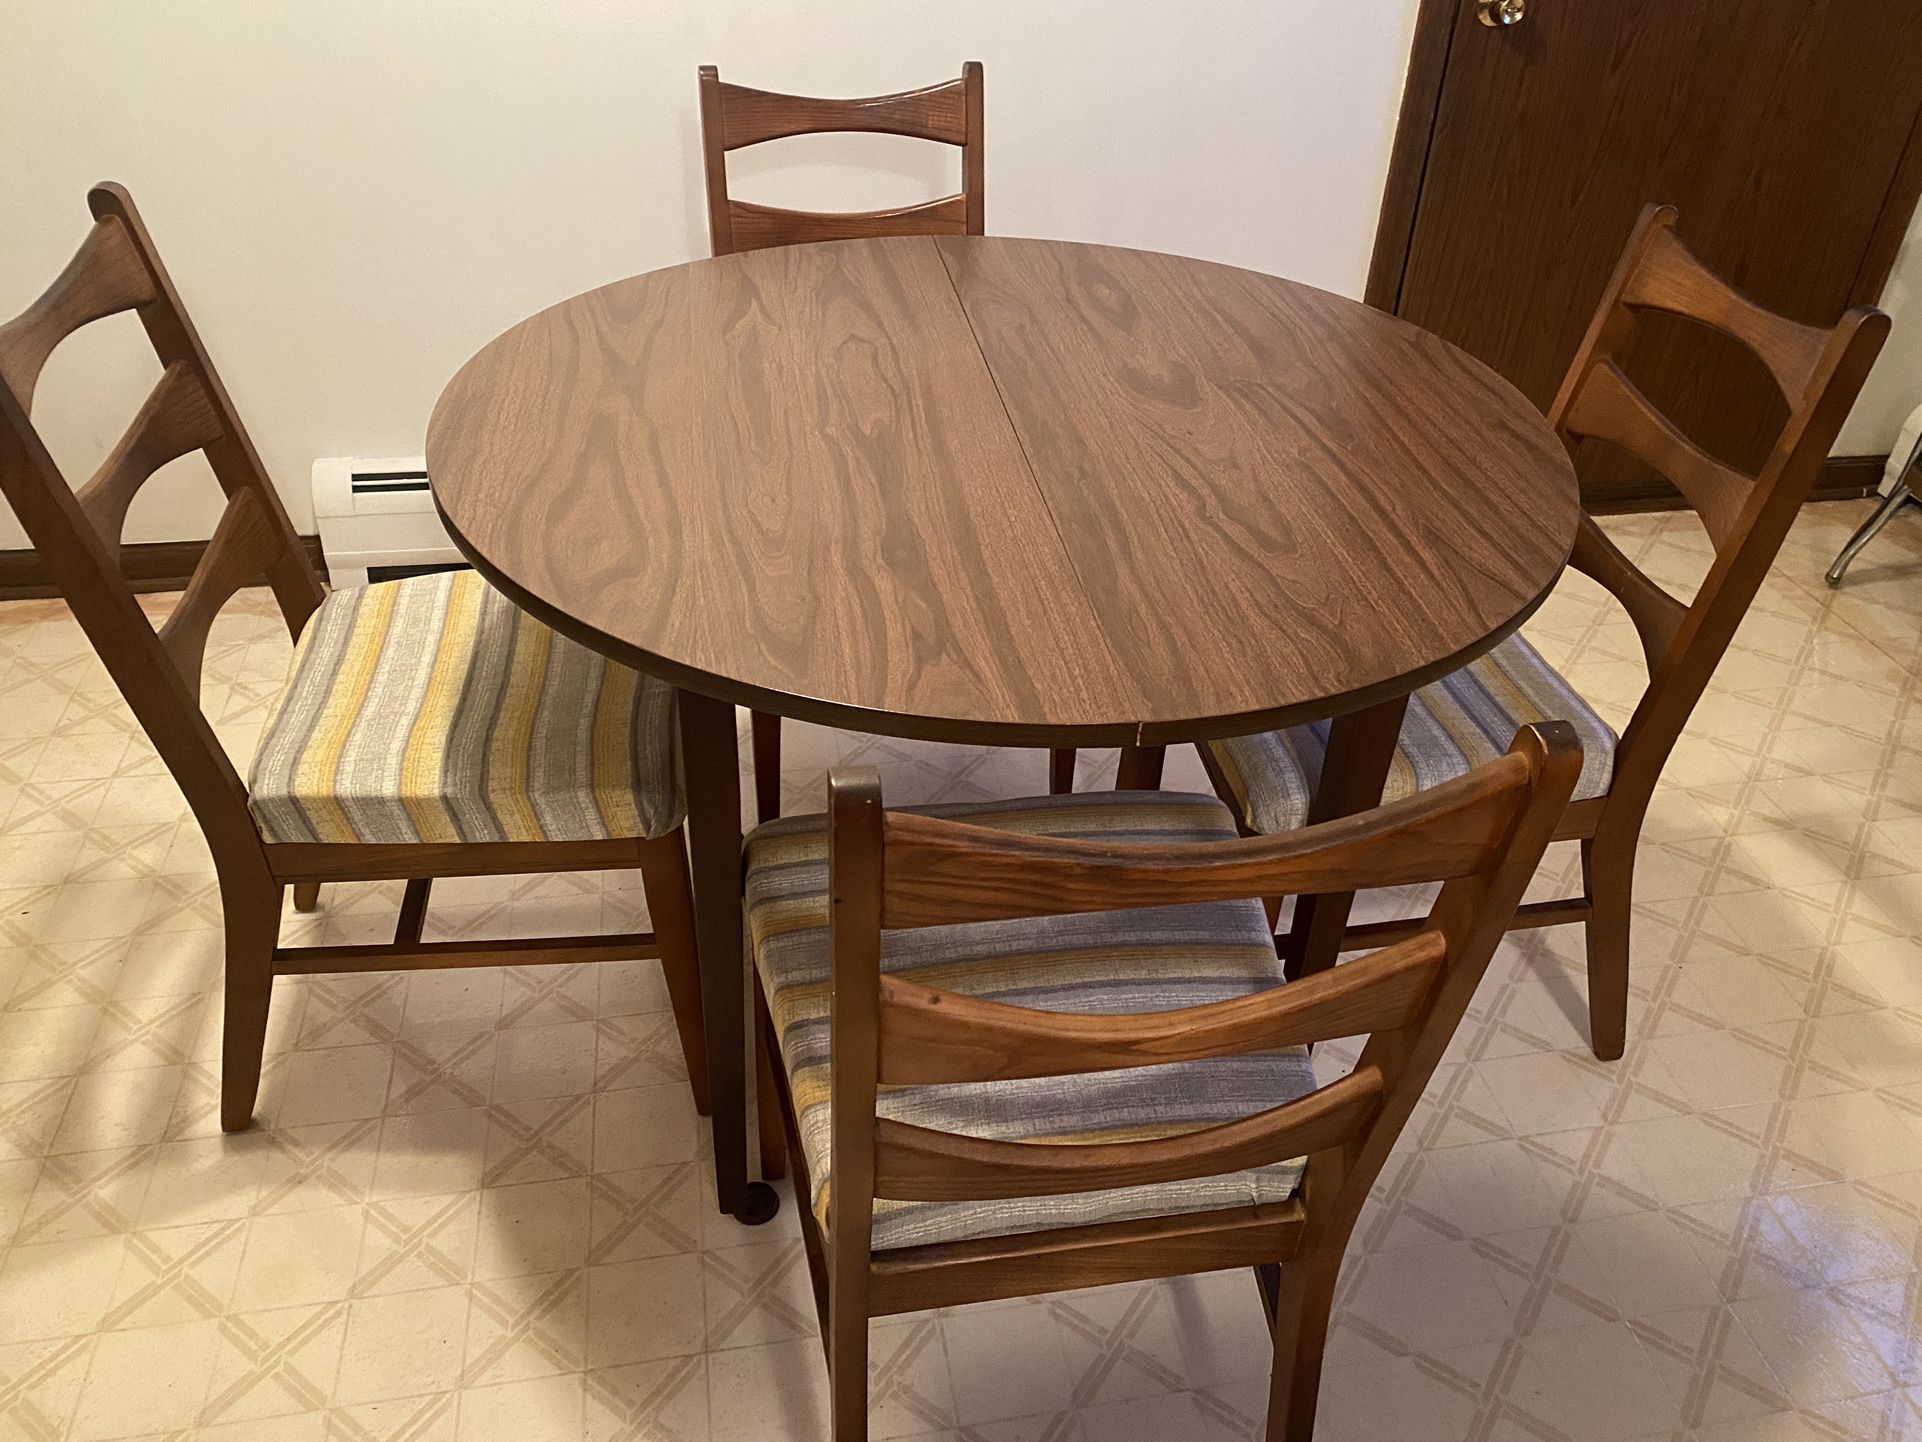  Kitchen Table And Chairs